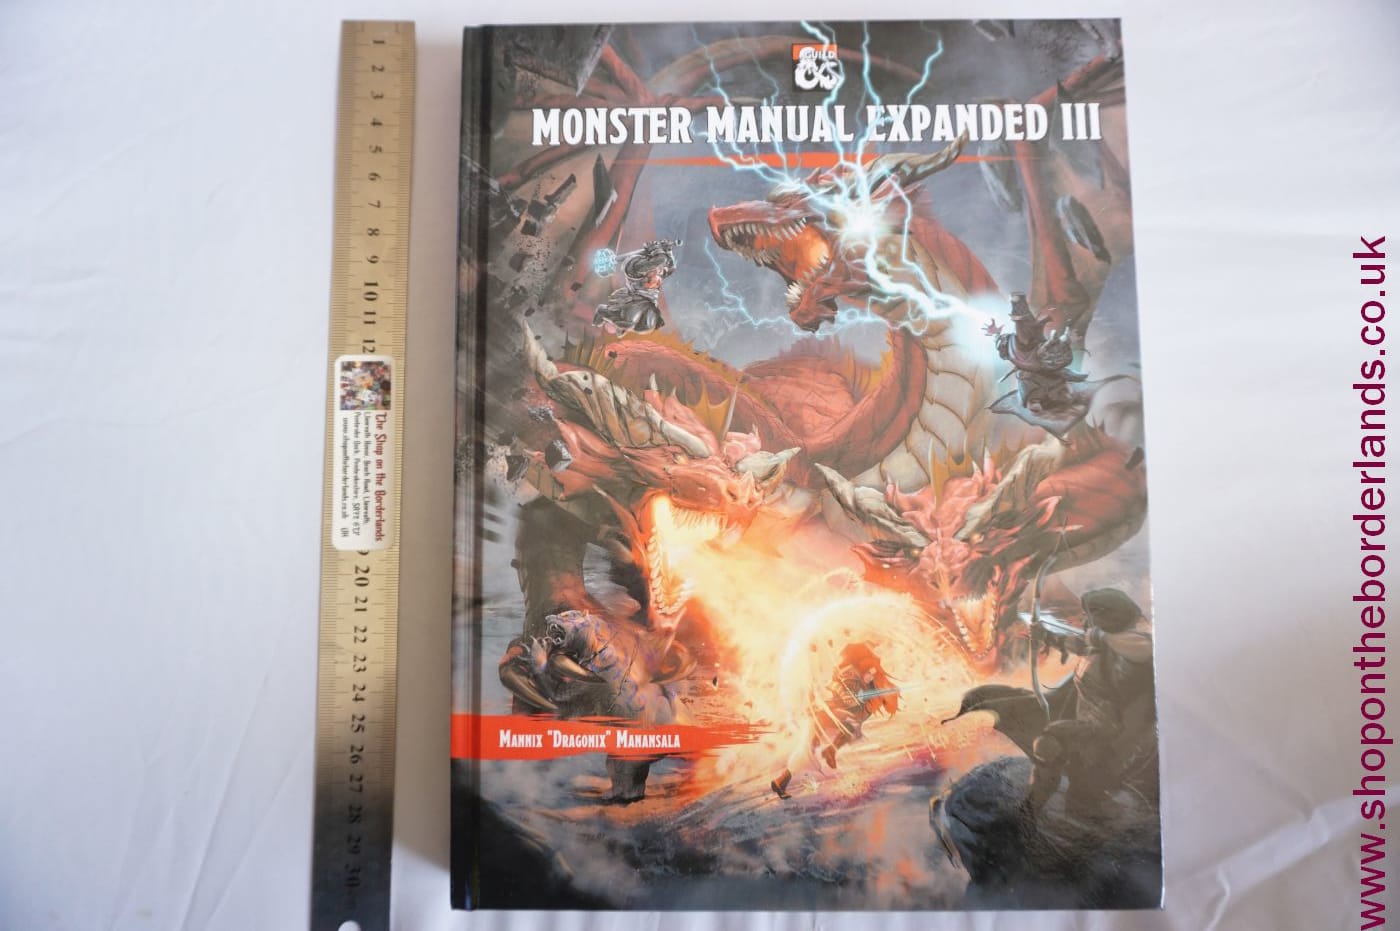 Monster Manual Expanded III